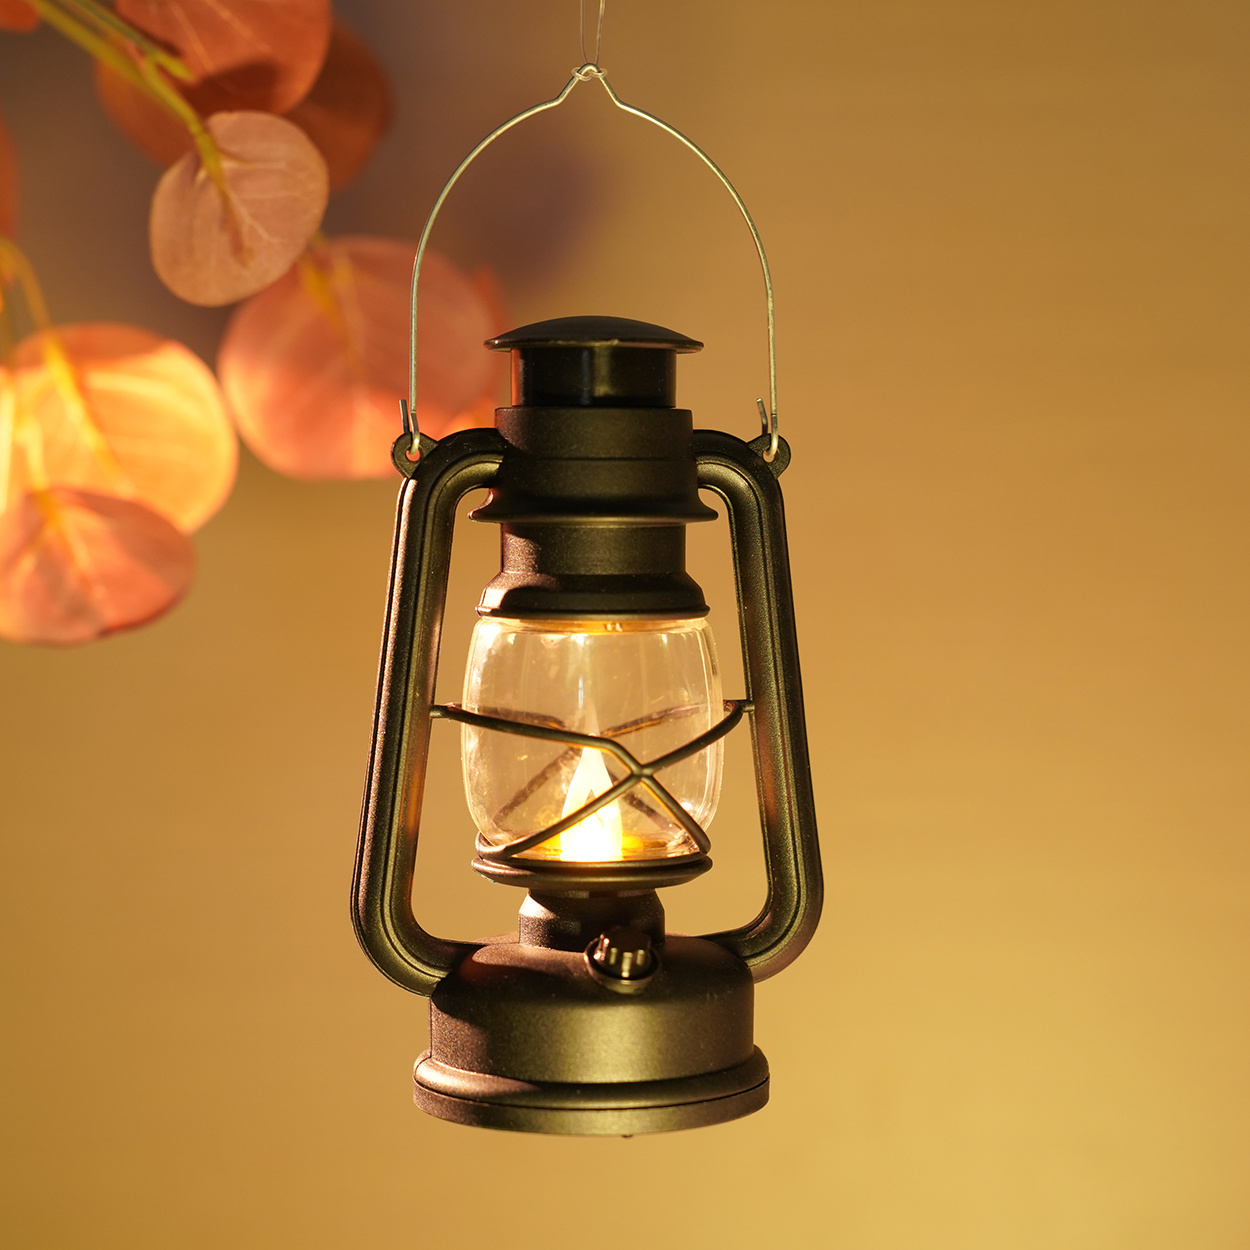 This portable LED lantern shines light on your outdoor adventures